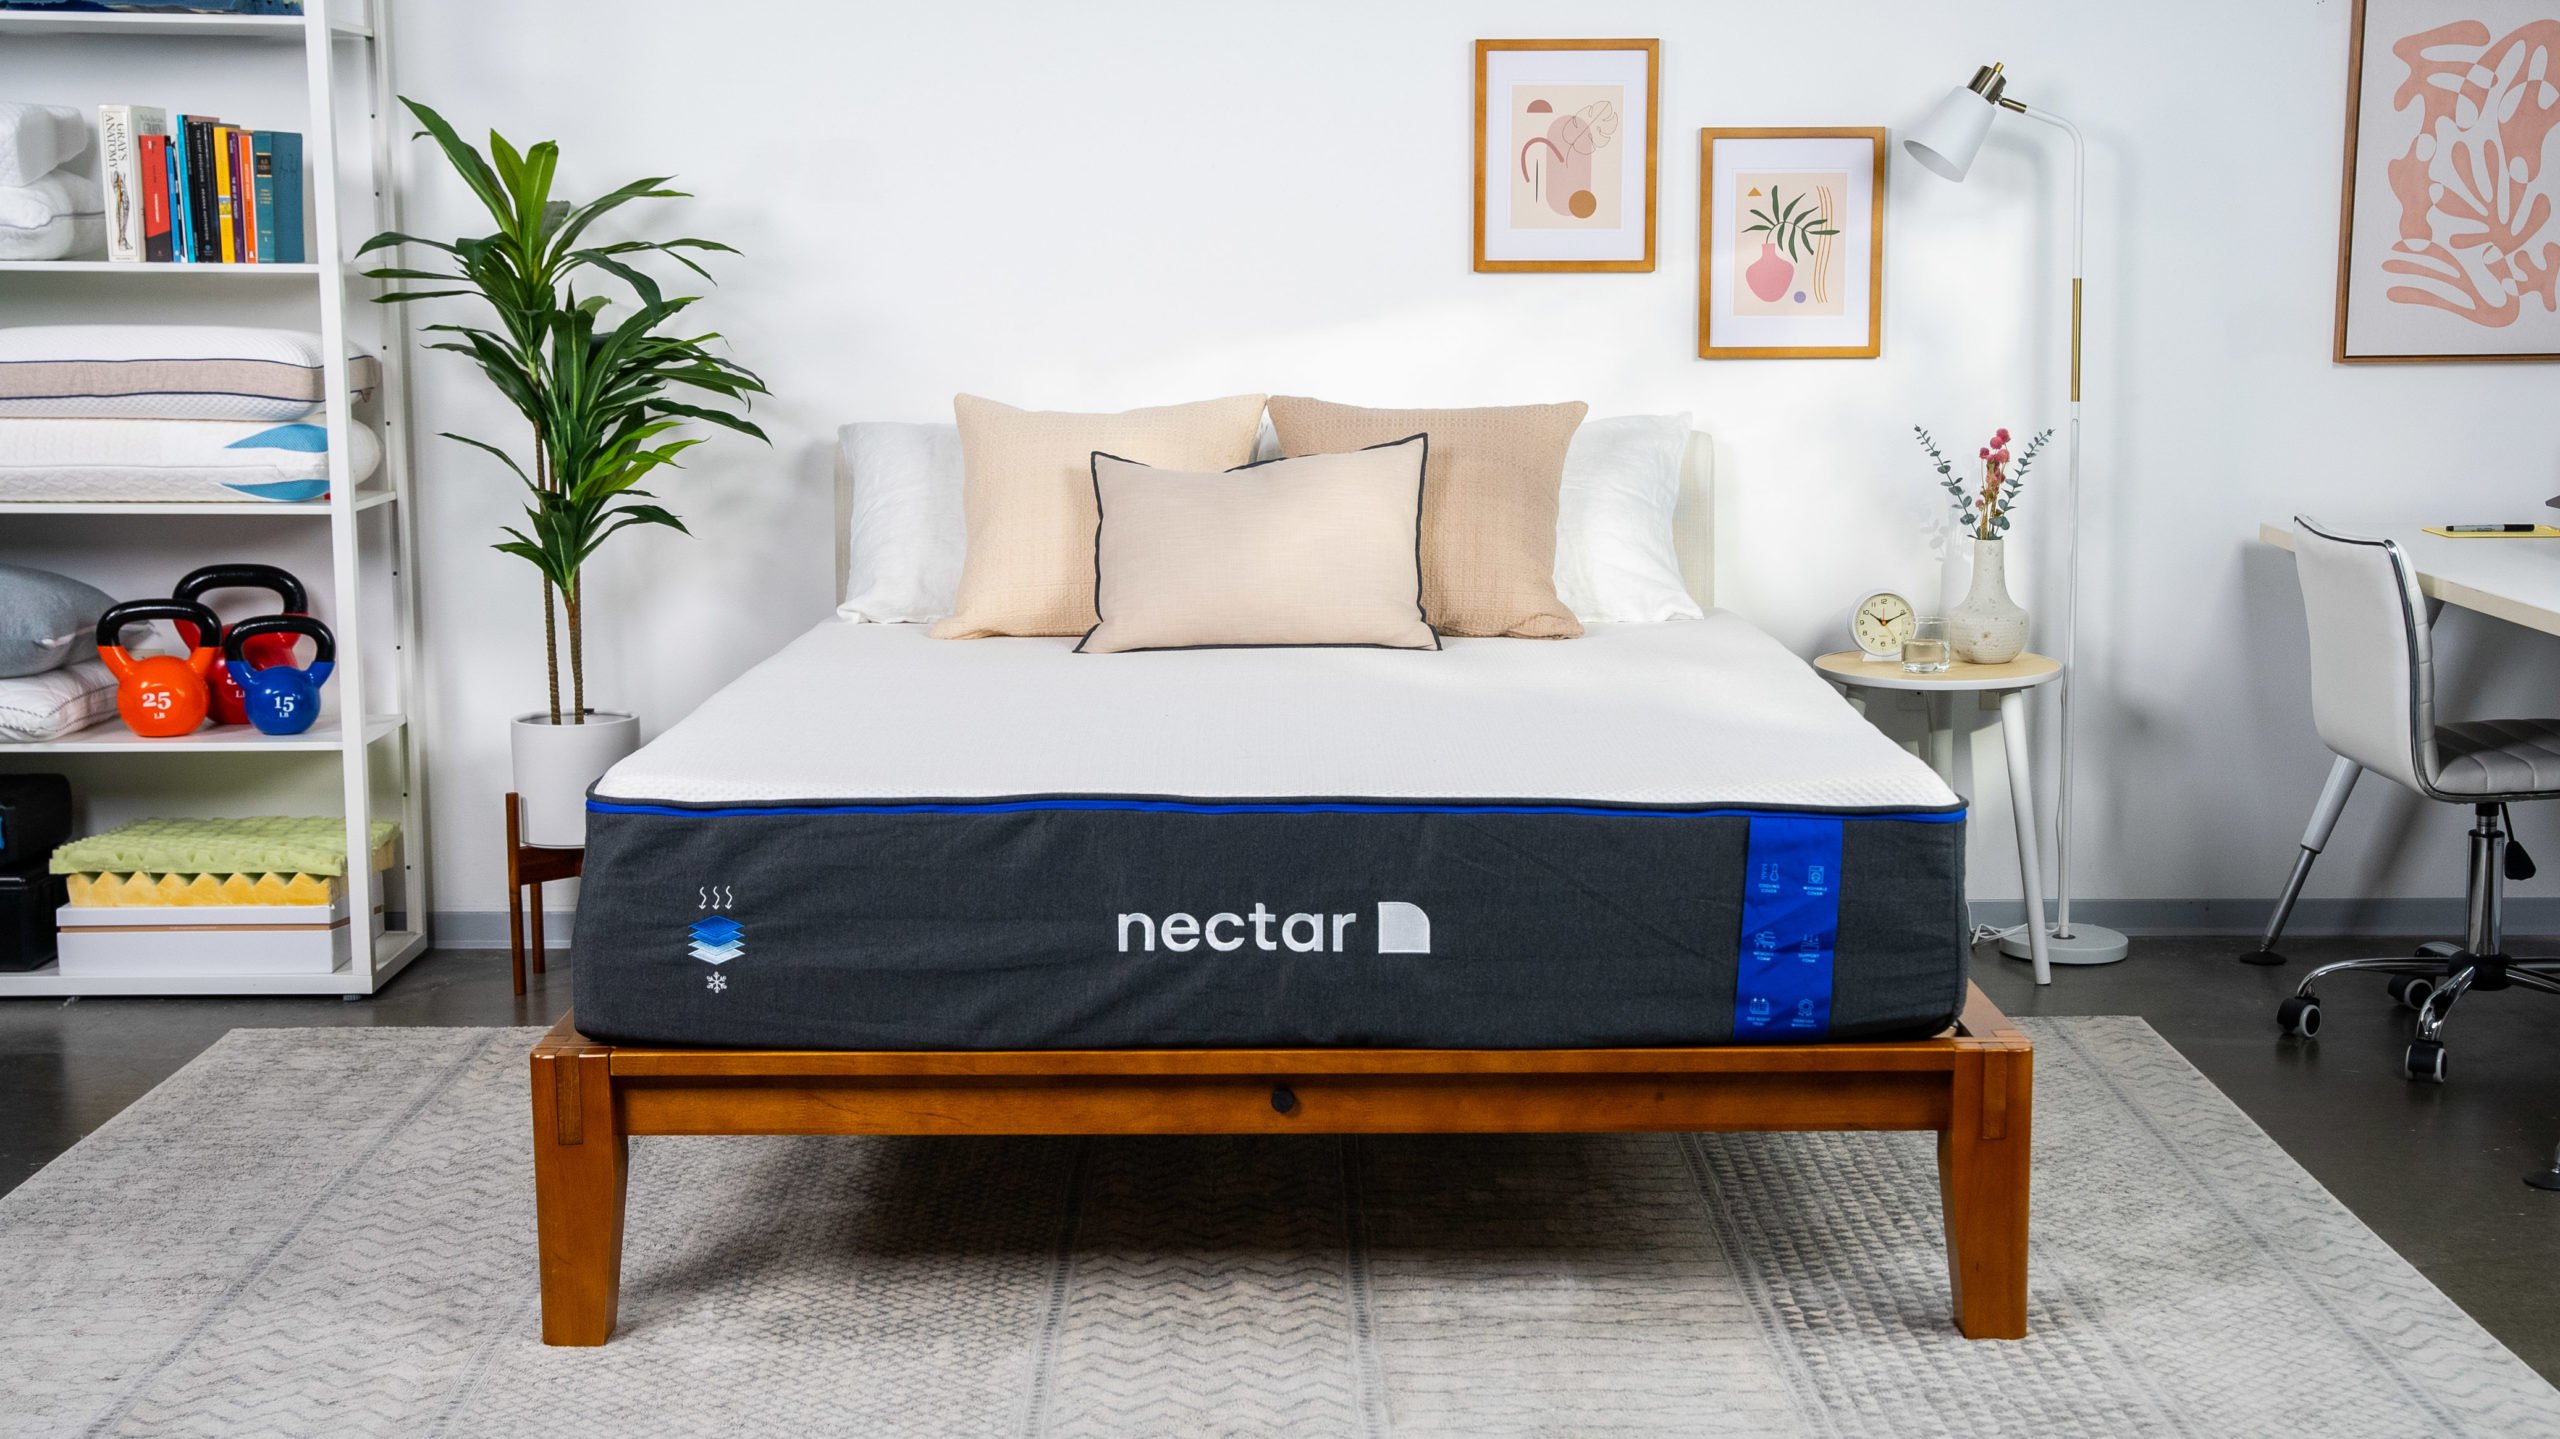 Nectar Mattress Review Is it Worth the Hype? Sleep Foundation